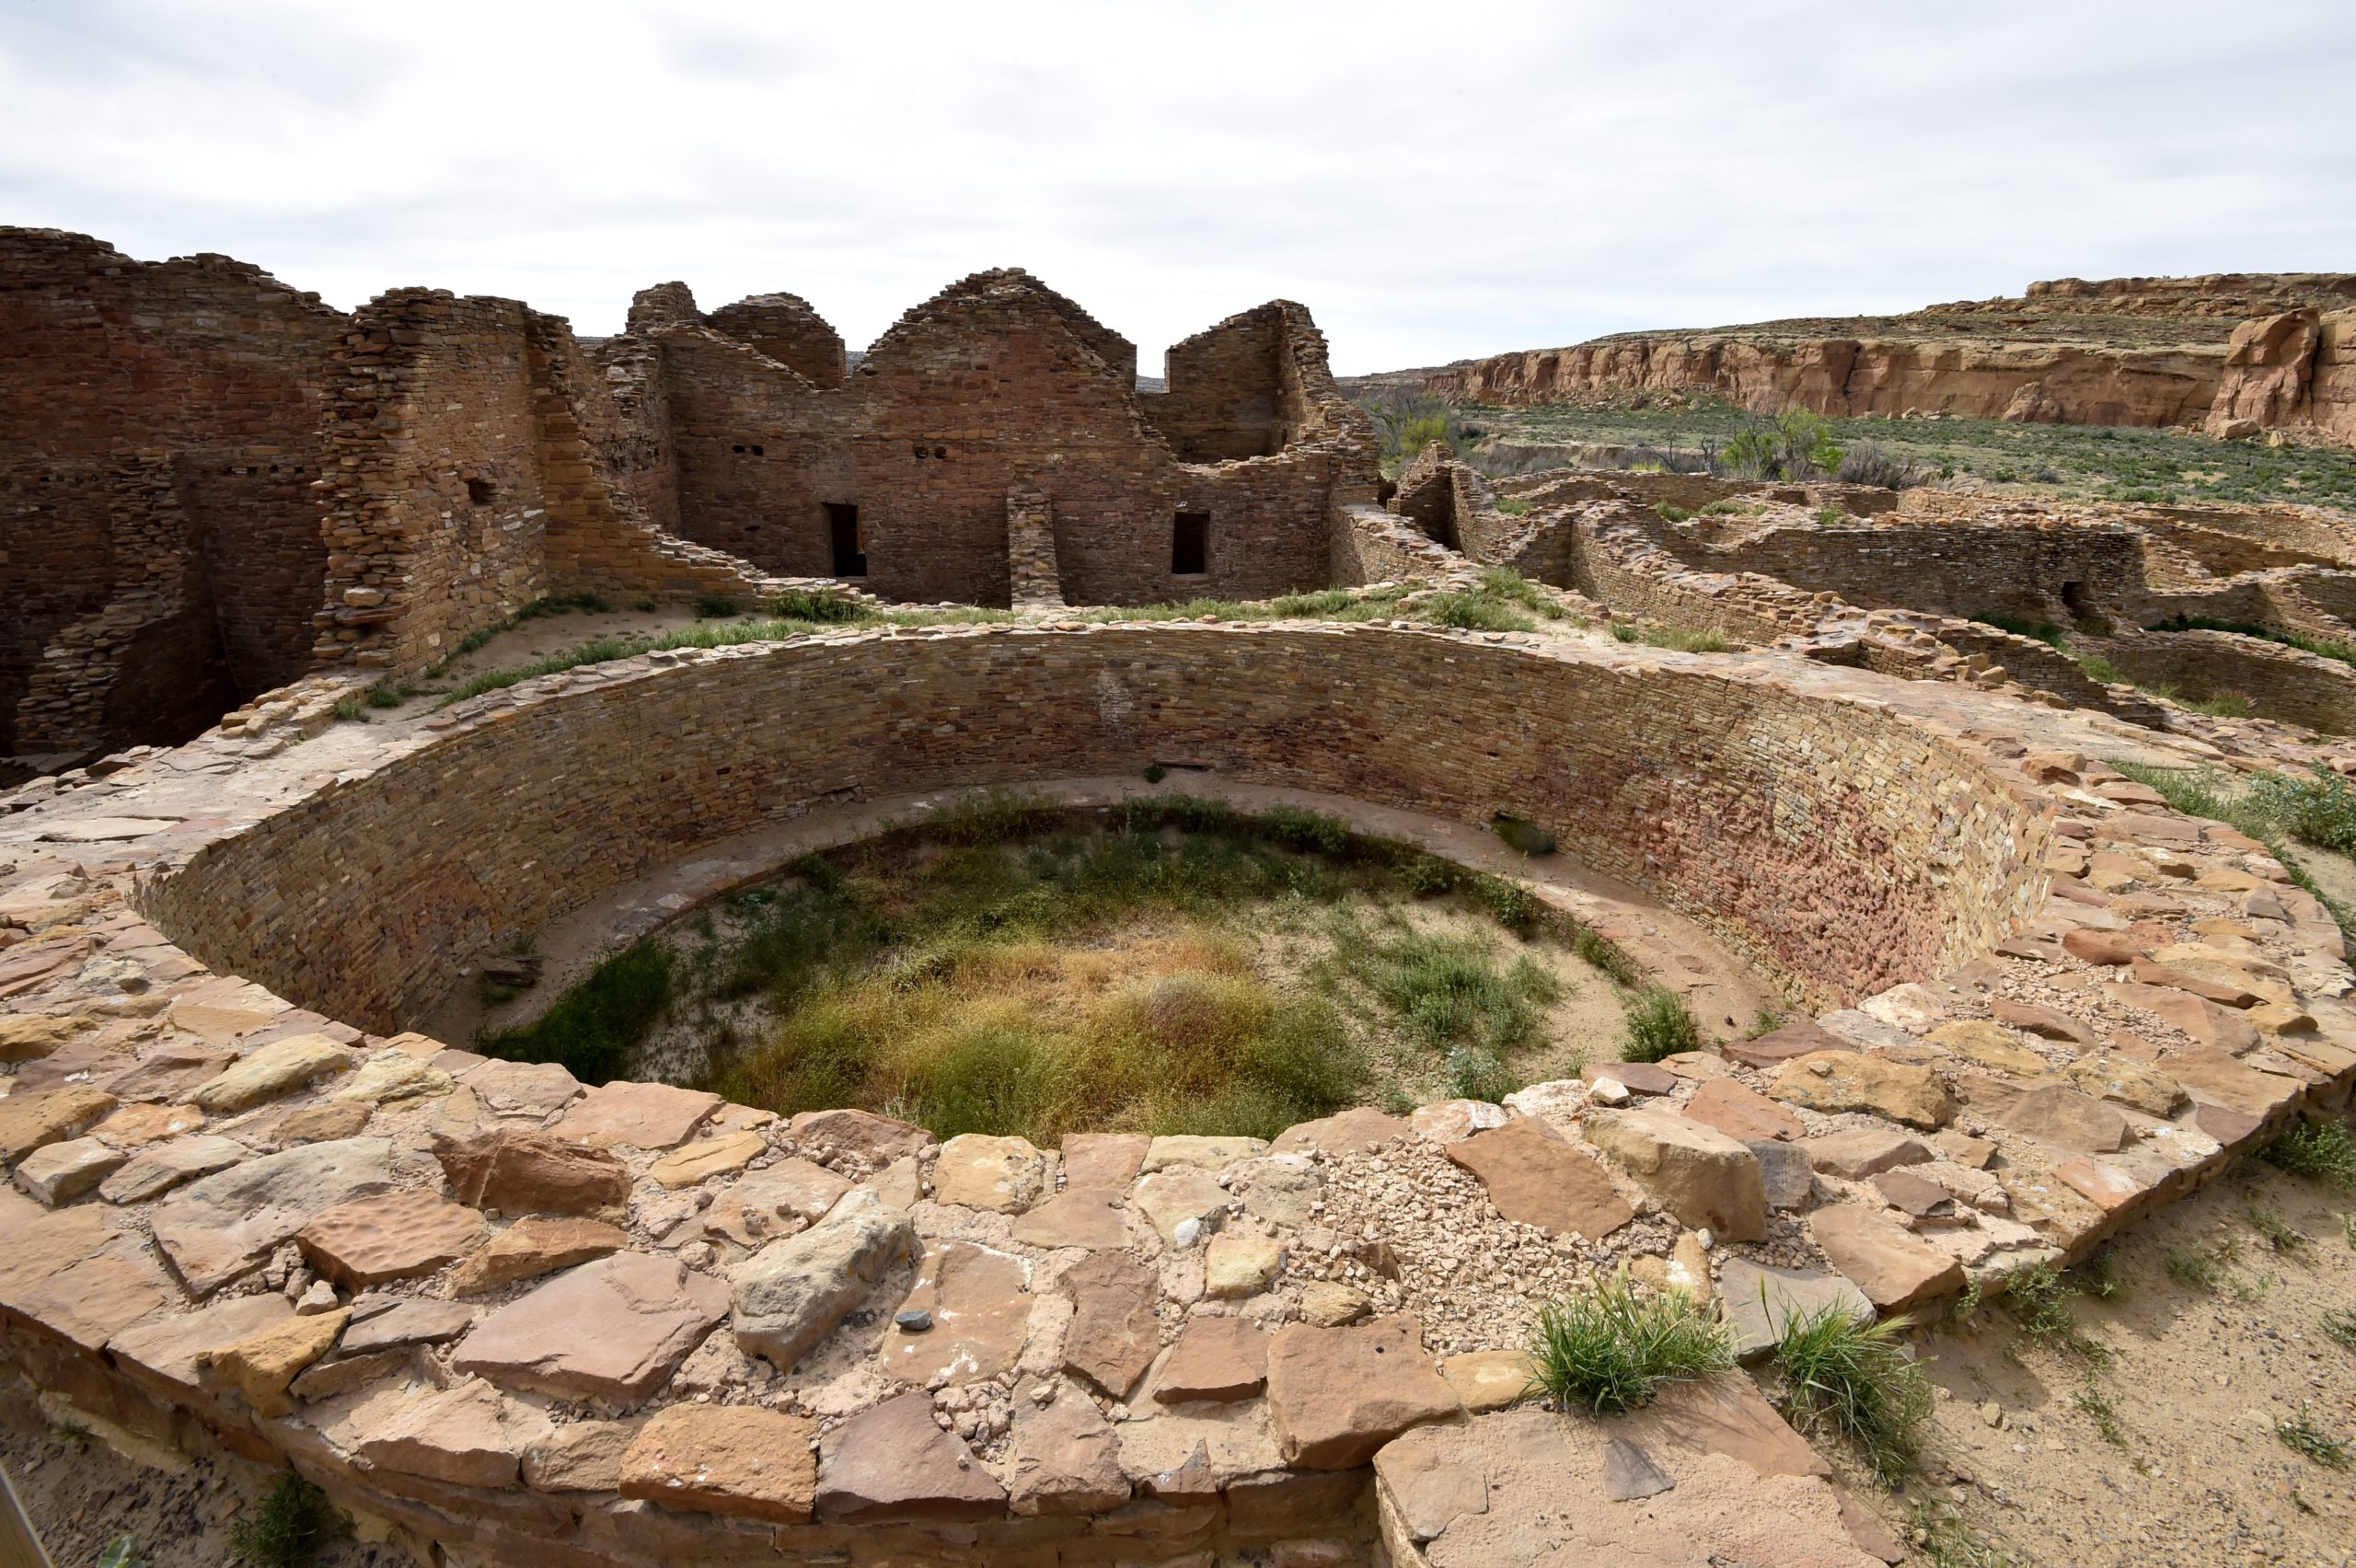 The ruins of the Pueblo del Arroyo house built by the Ancient Puebloan people is seen at Chaco Culture National Historical Park on May 20, 2015. (Mladen Antonov/AFP via Getty Images)